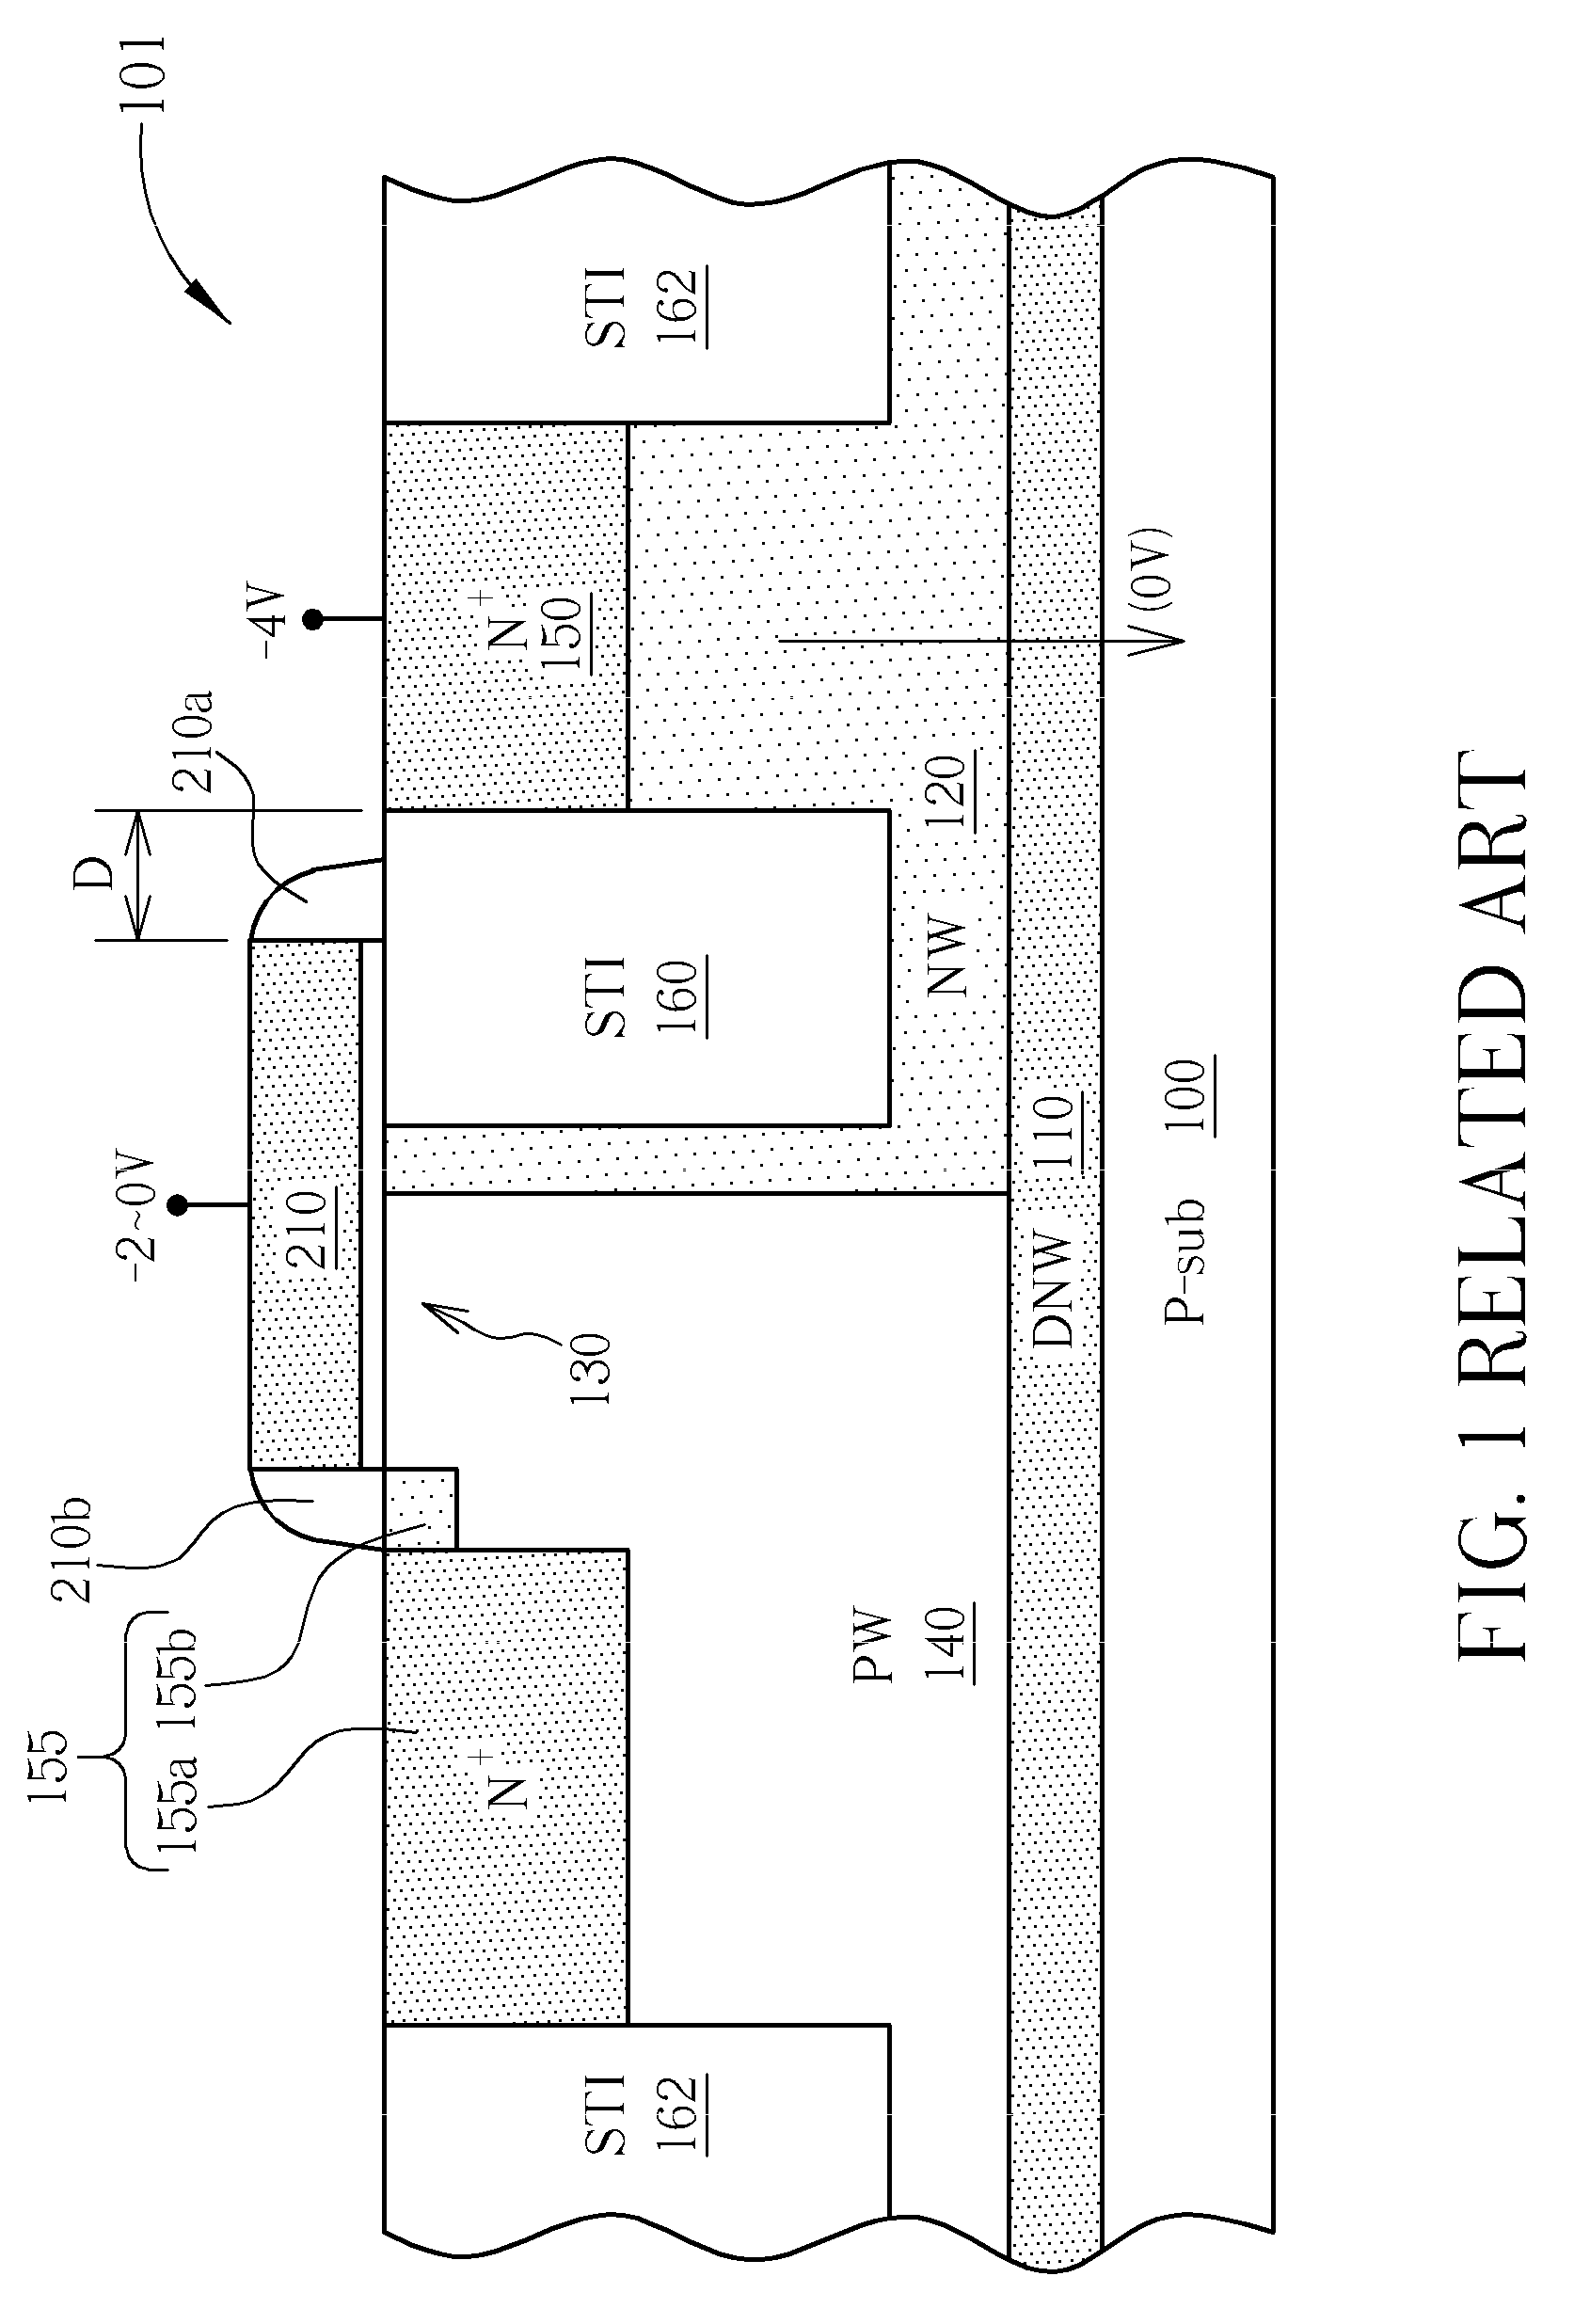 High-voltage metal-oxide-semiconductor device